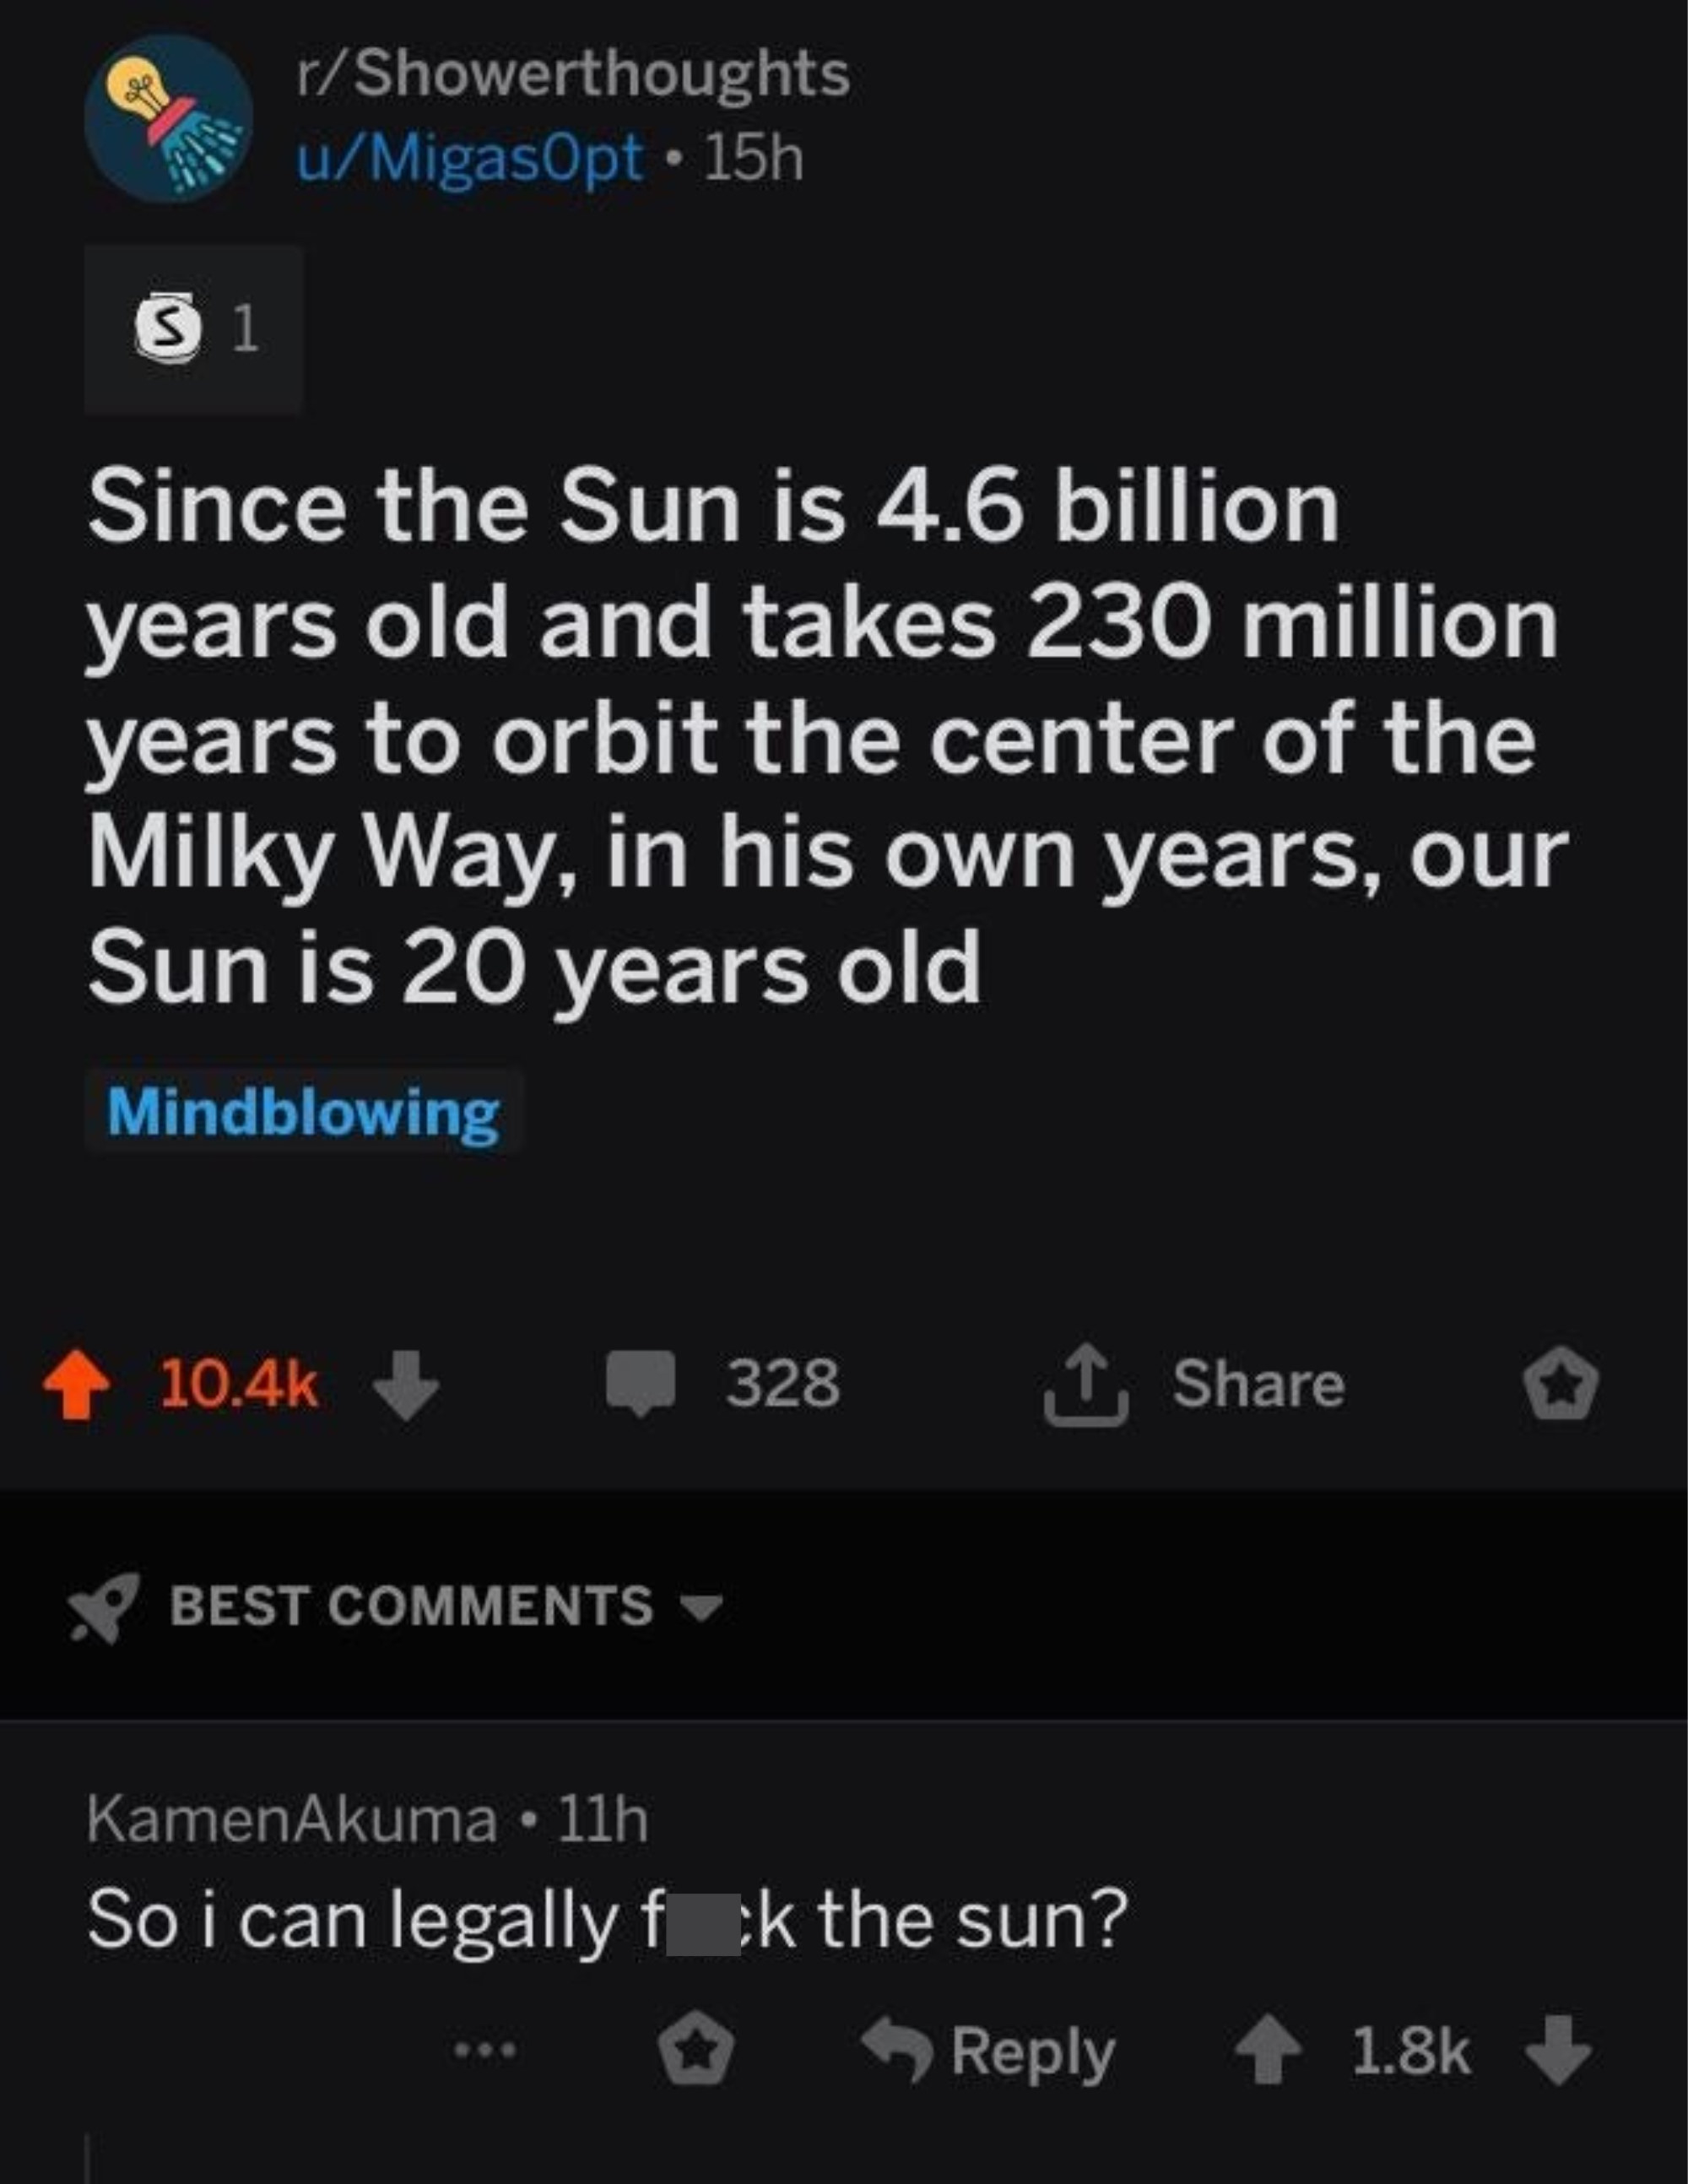 someone says based on space math the sun is 20 years old and someone responds so i can legally fuck the sun